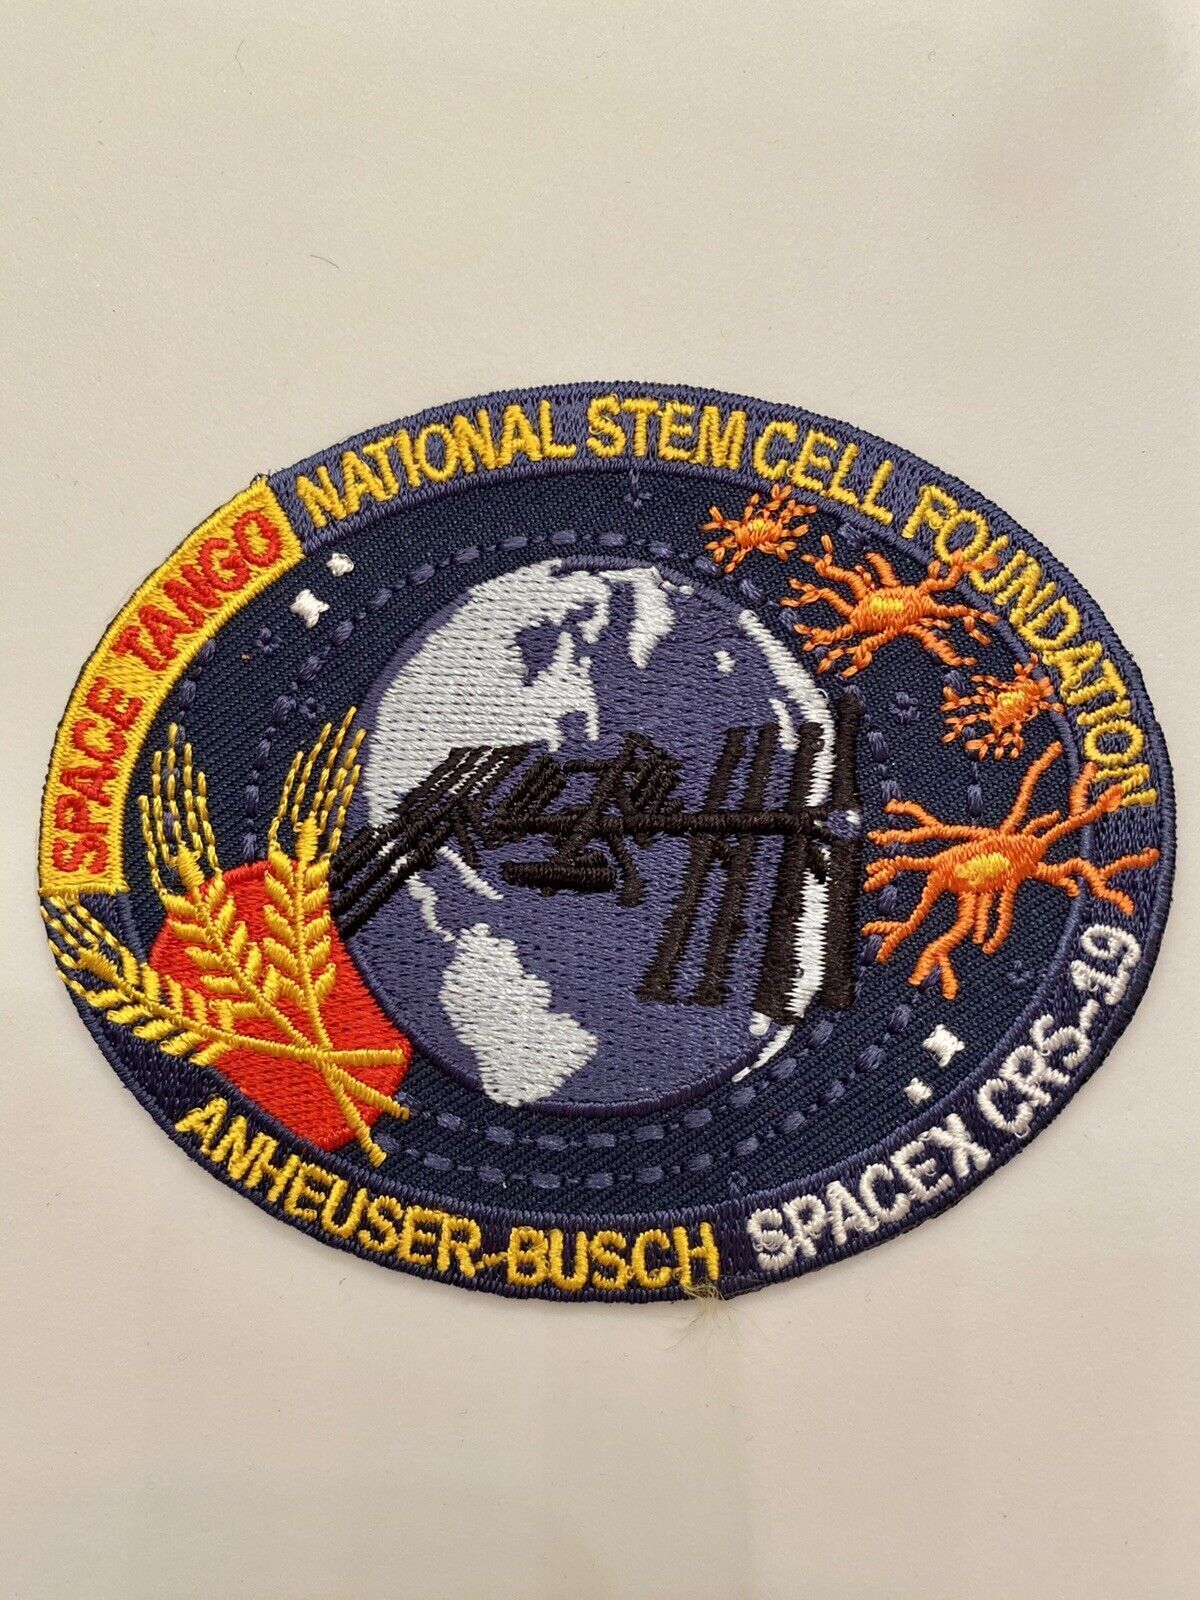 BUDWEISER NATIONAL STEM CELL RESEARCH SPACEX NASA CRS-19 ISS SPACE Mission PATCH